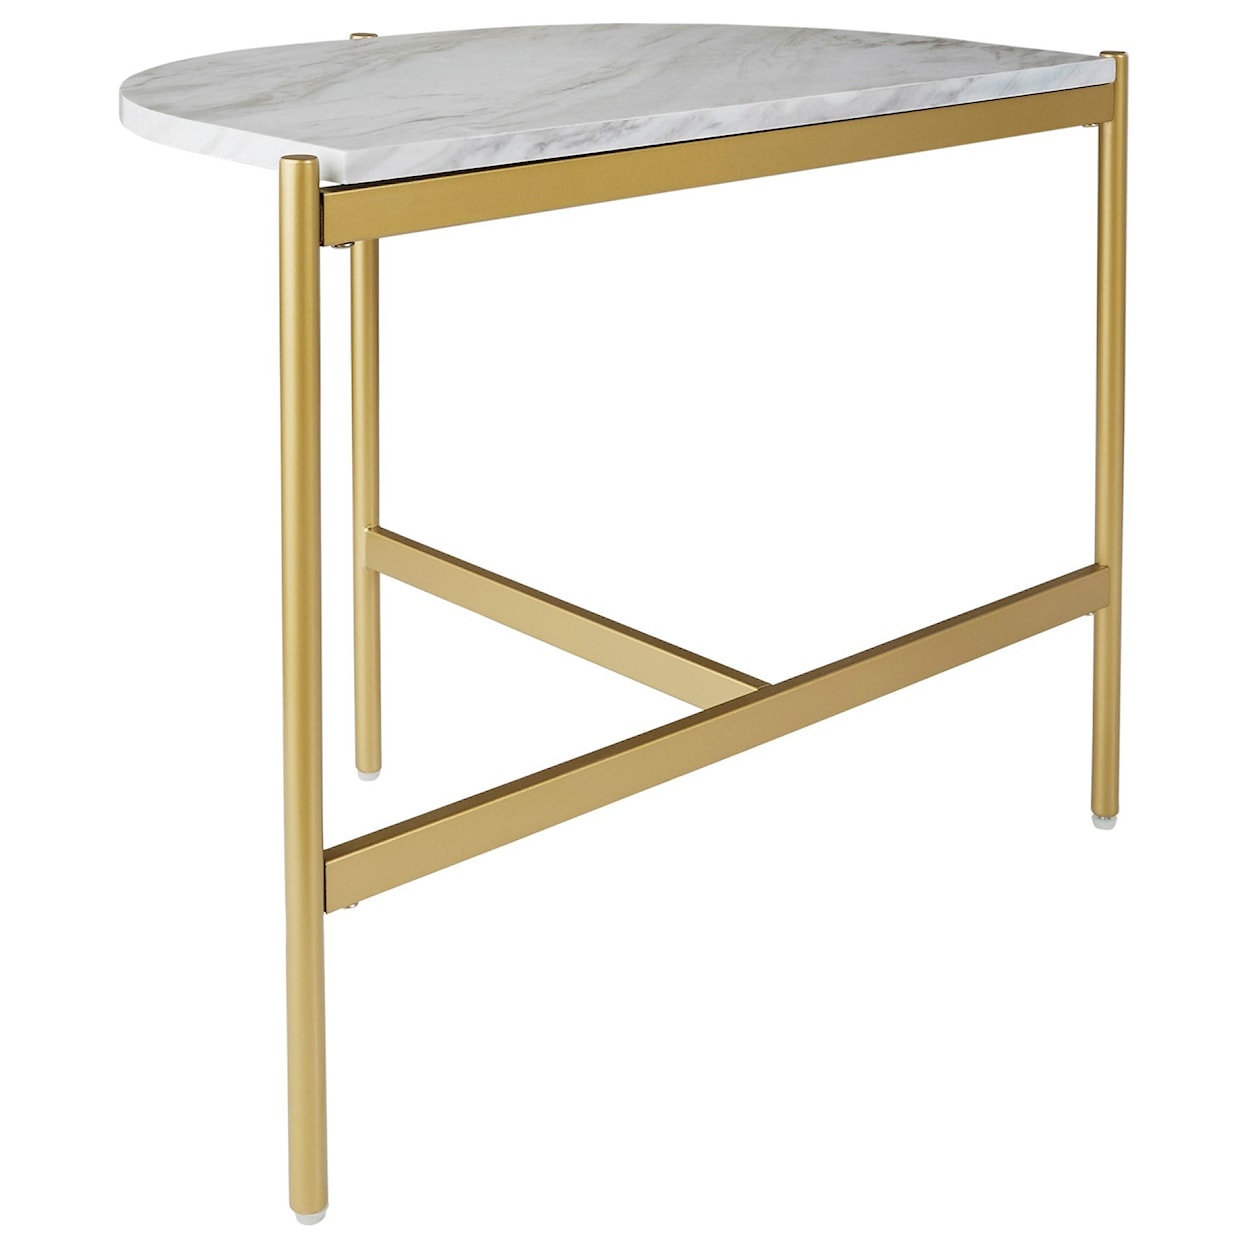 Design Wynora | Marble Furniture Half-Round Chair Faux Side Signature Tables with Gold Finish End T192-7 End HomeWorld | Ashley Top by Table